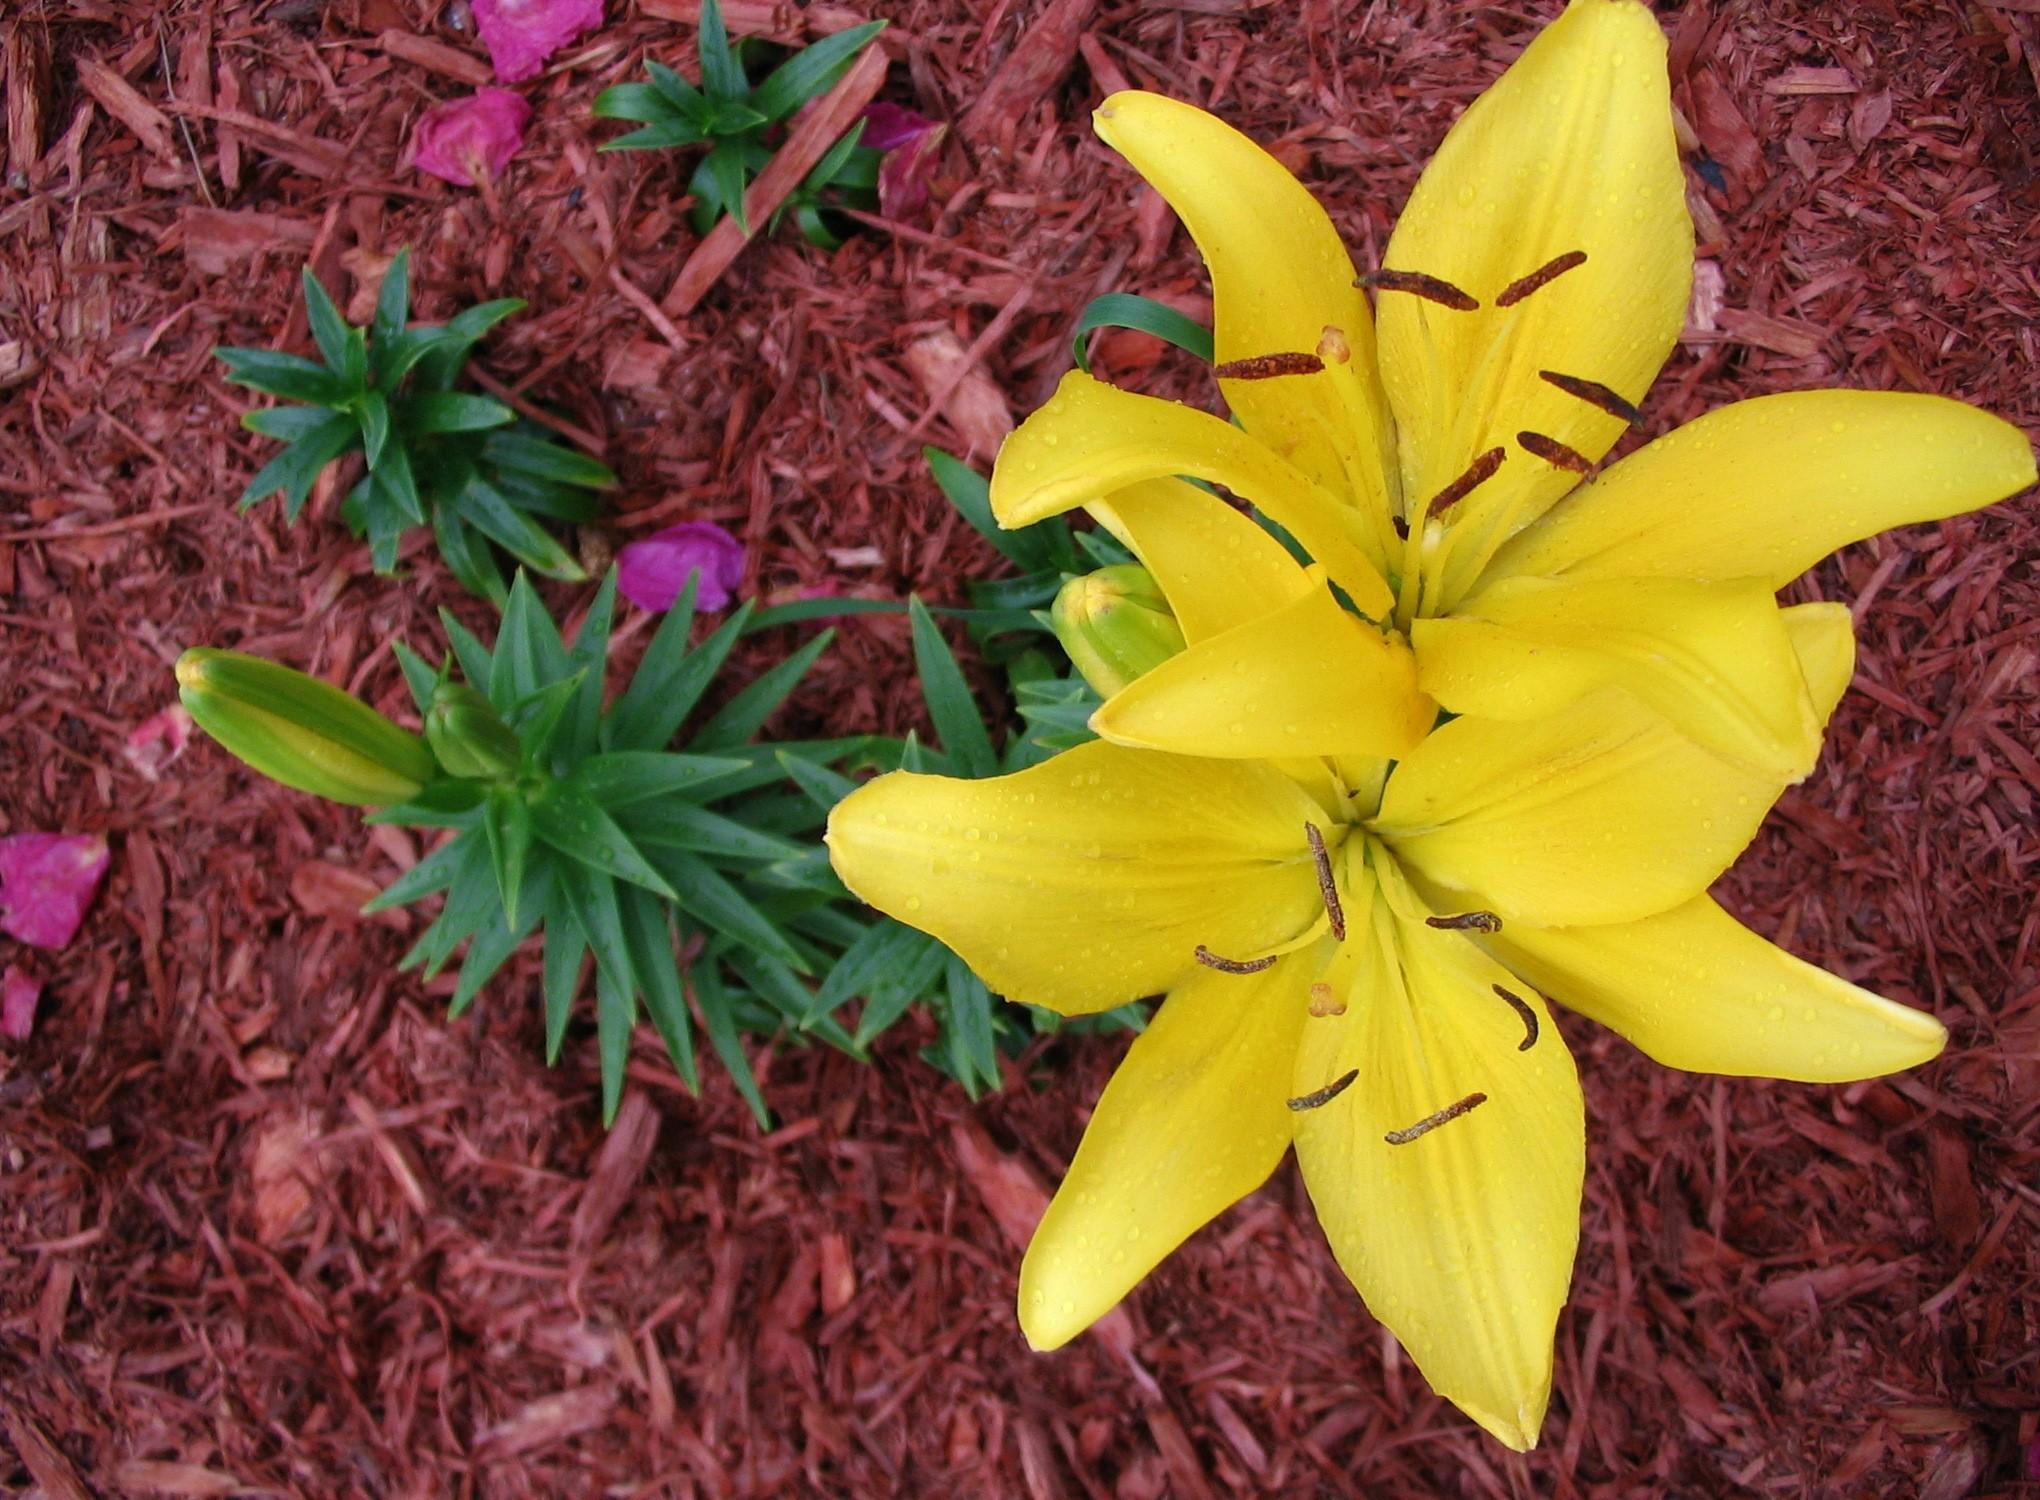 drops, flowers, lilies, yellow, flower bed, flowerbed, freshness, loose, dissolved, fertilizers